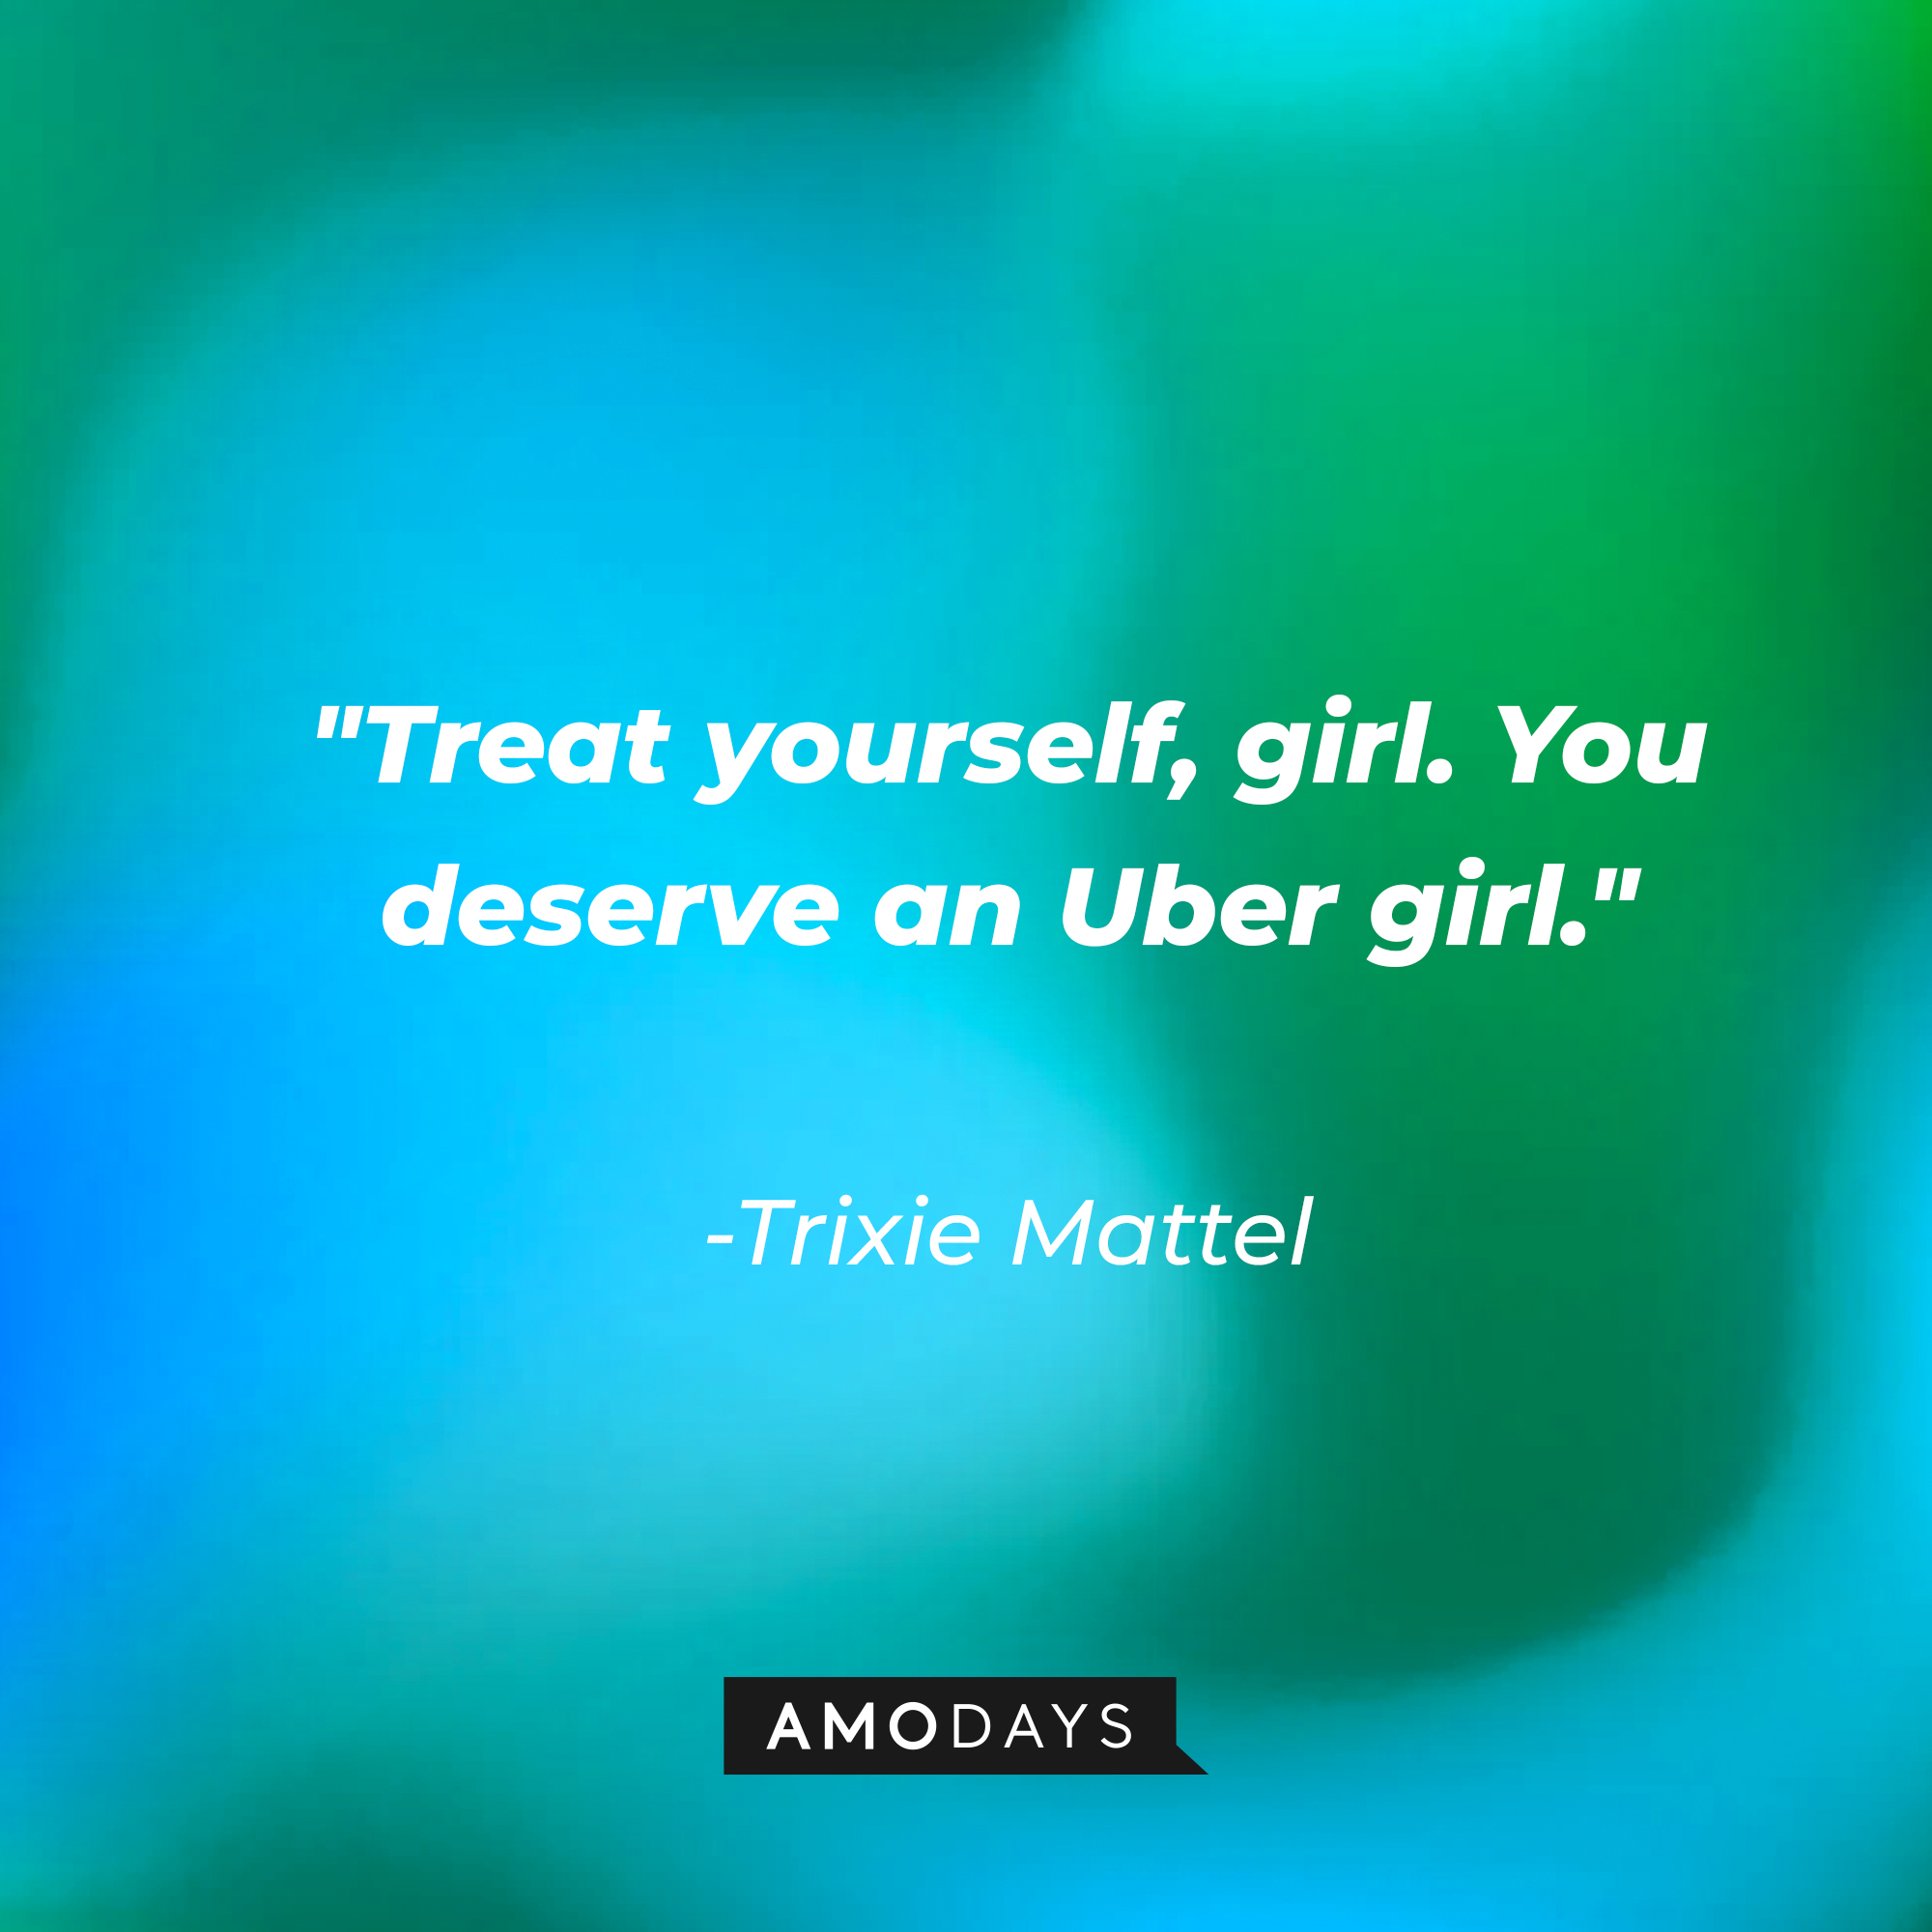 Trixie Mattel's quote: "Treat yourself, girl. You deserve an Uber girl." | Source: AmoDays